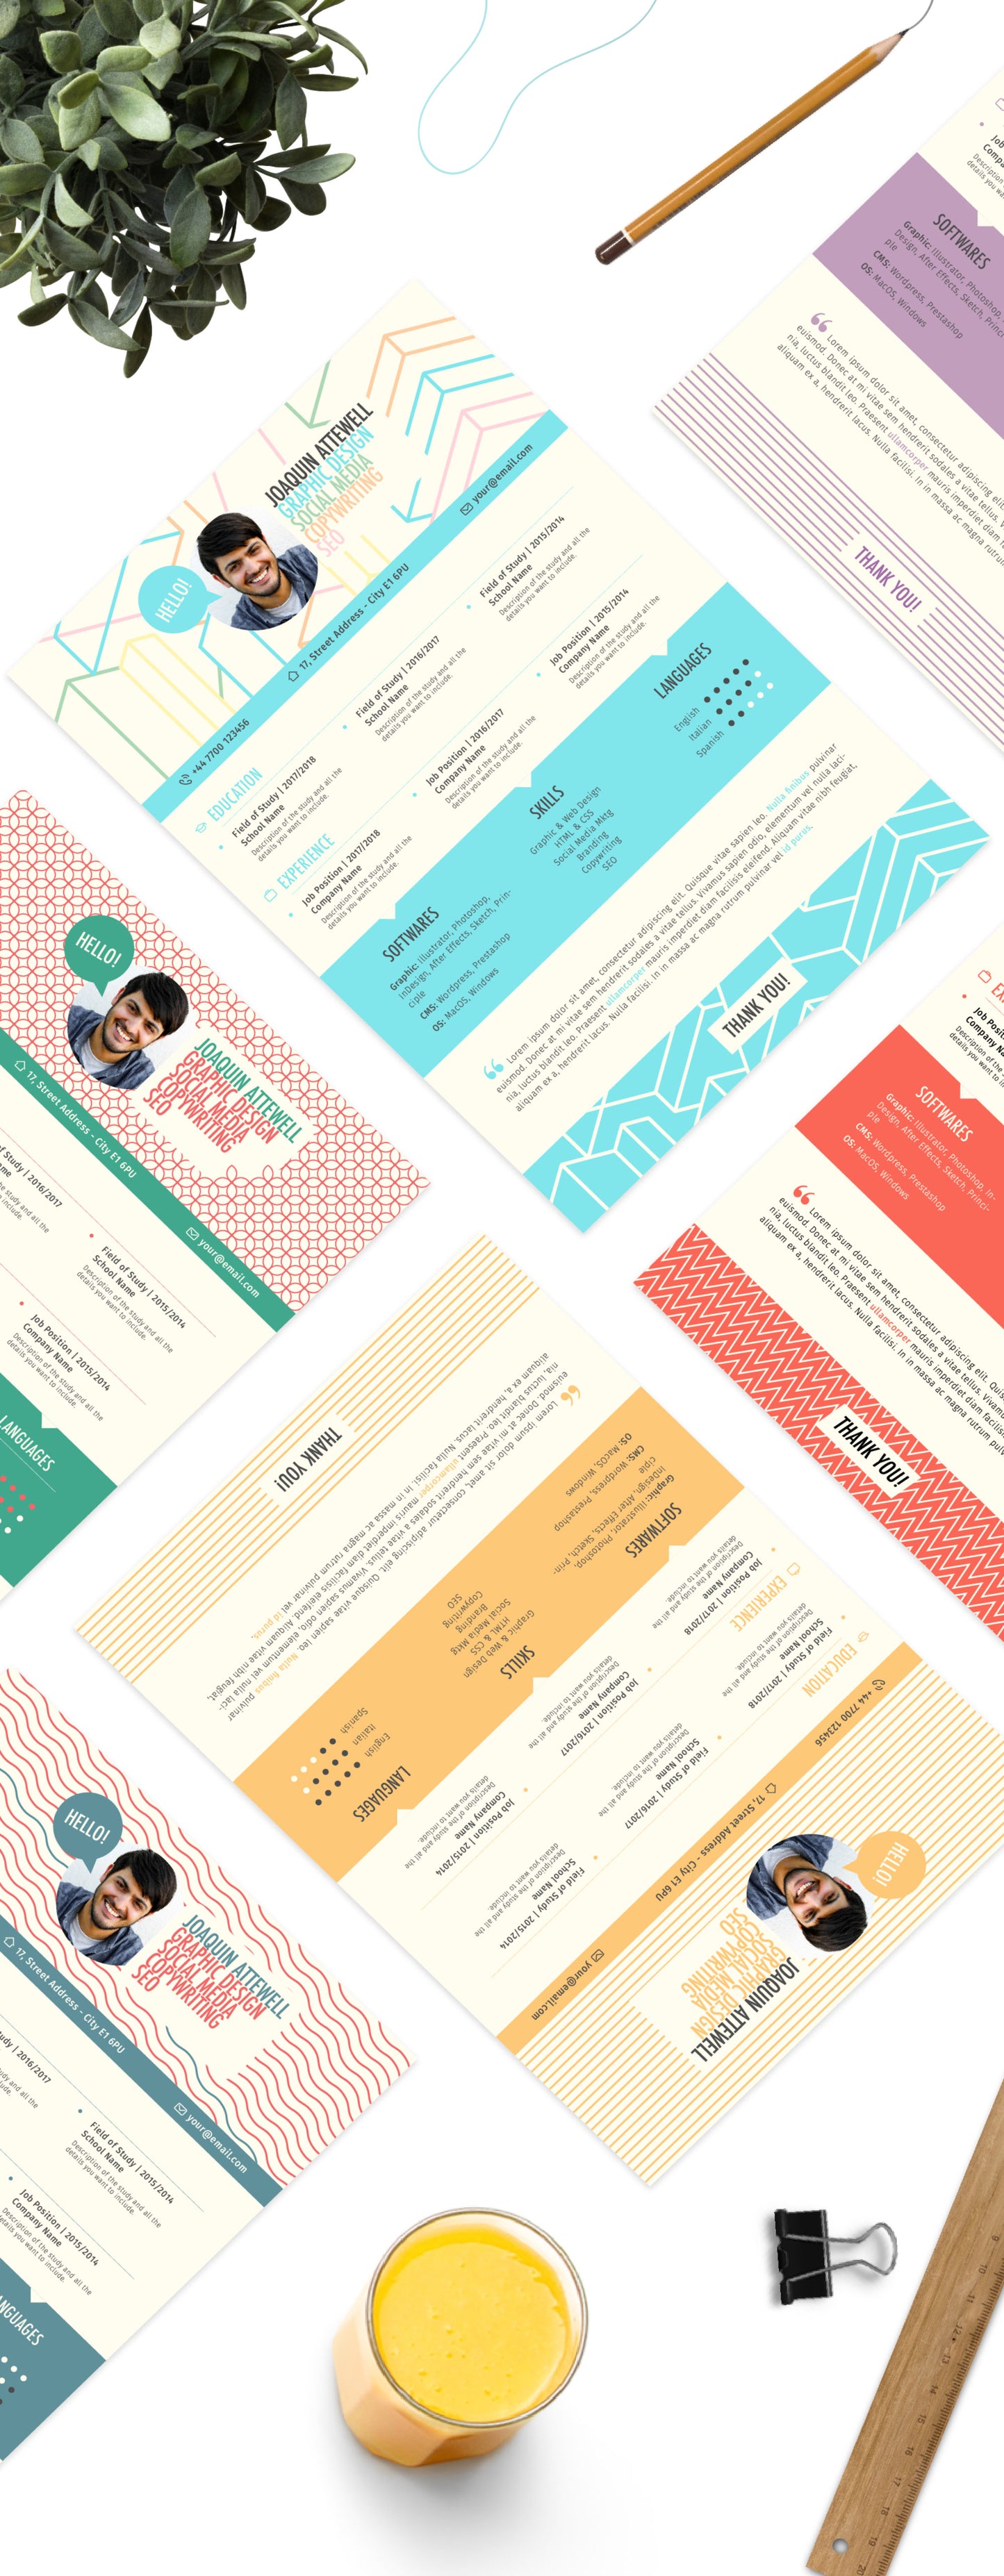 Free 6 Styles of Resume Templates in Illustrator (AI) Format